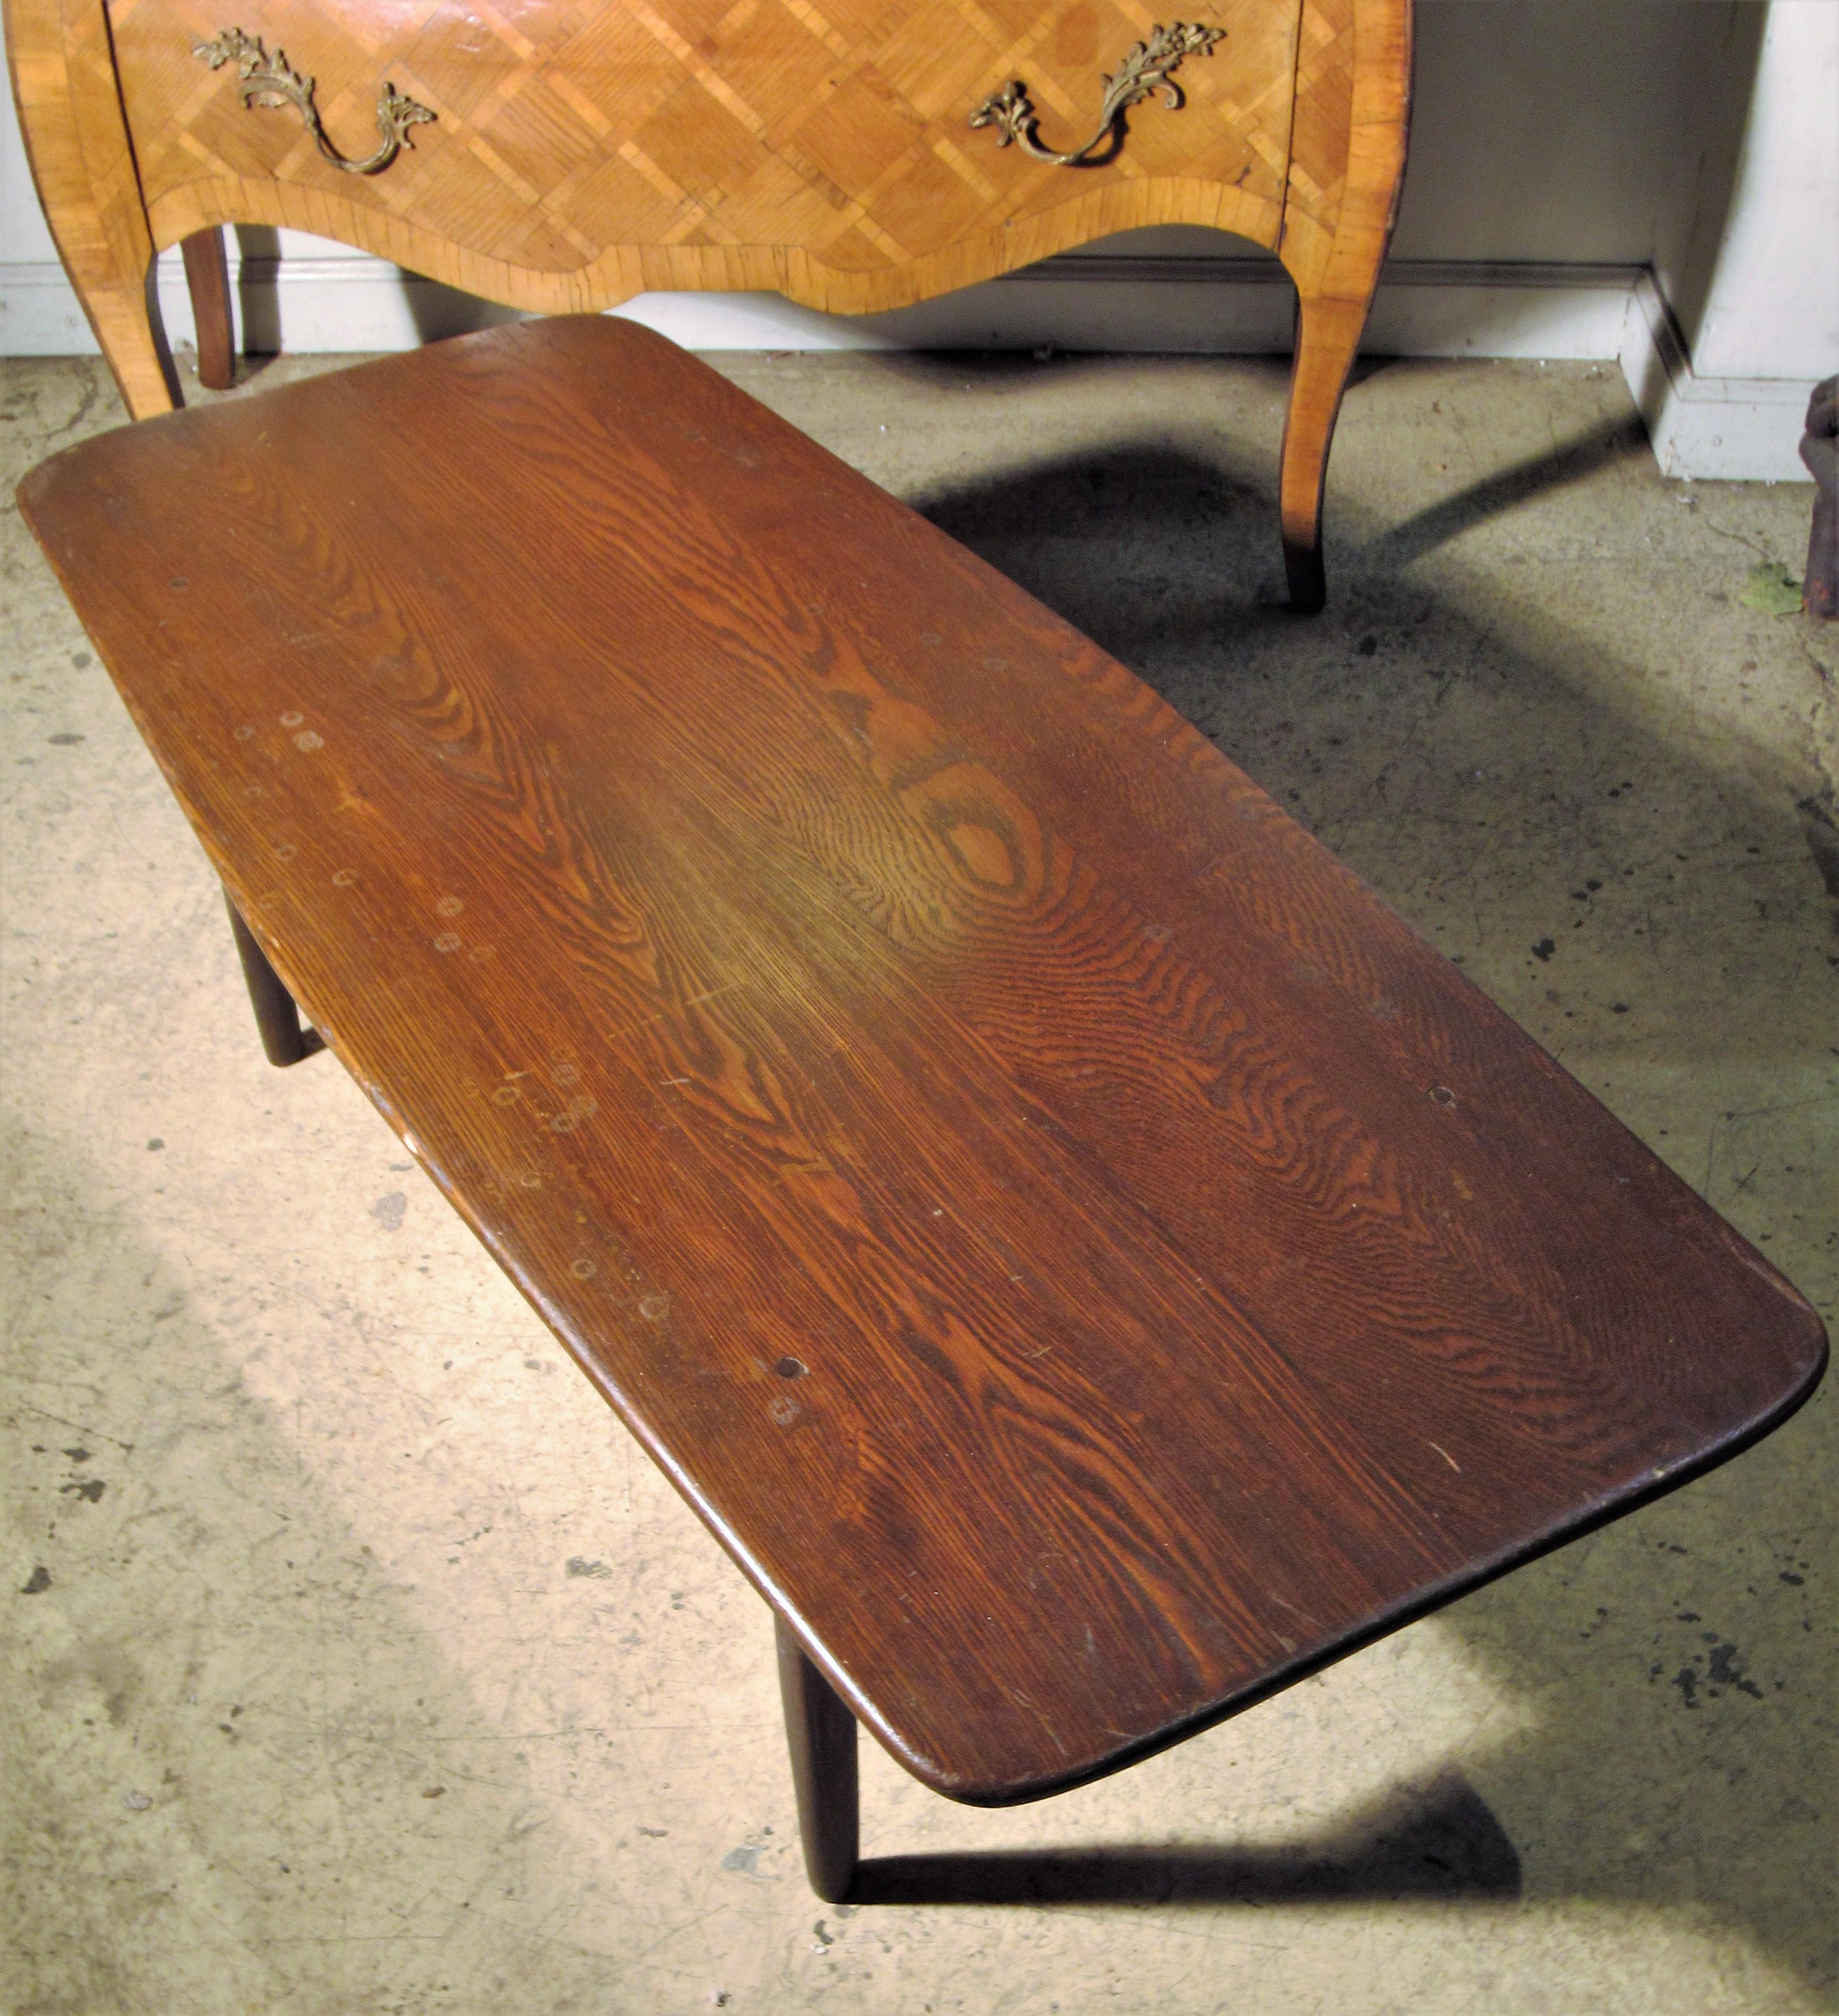 Hand-Crafted Mid-20th Century American Studio Craft Movement Coffee Table